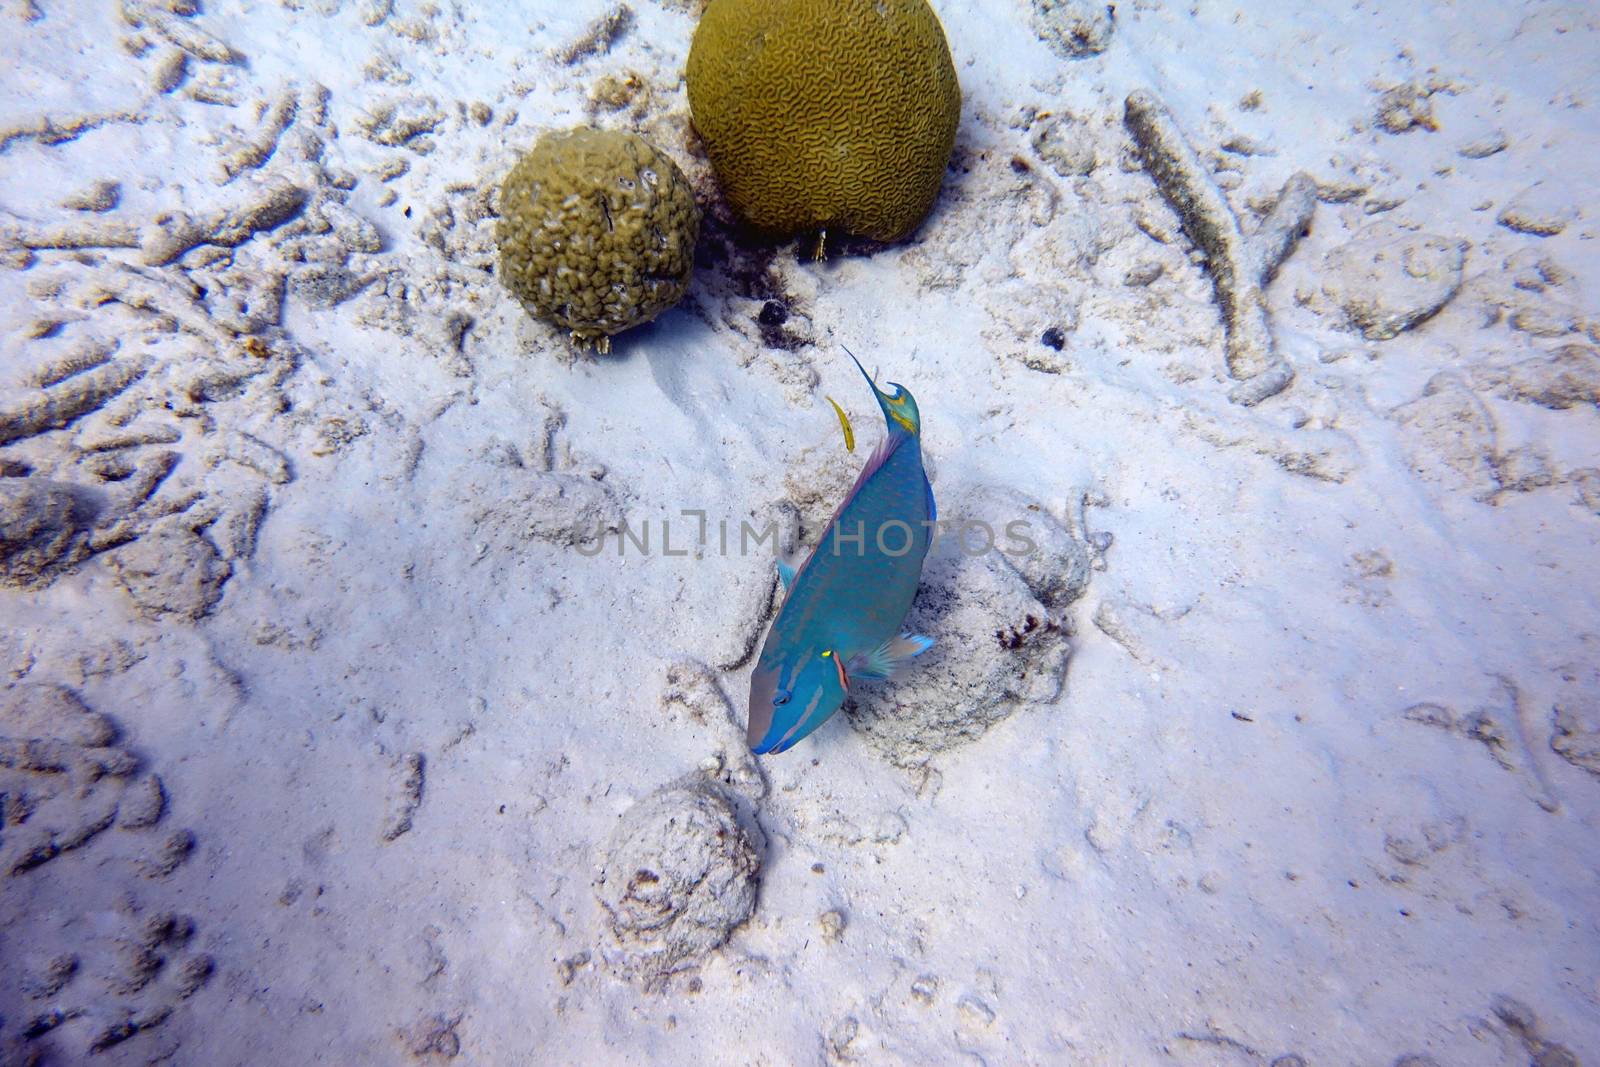 An underwater photo of a Parrotfish swimming around the rock and coral reefs in the ocean.  Parrotfish are a colorful group of marine species (95) found in relatively shallow tropical and subtropical oceans around the world.